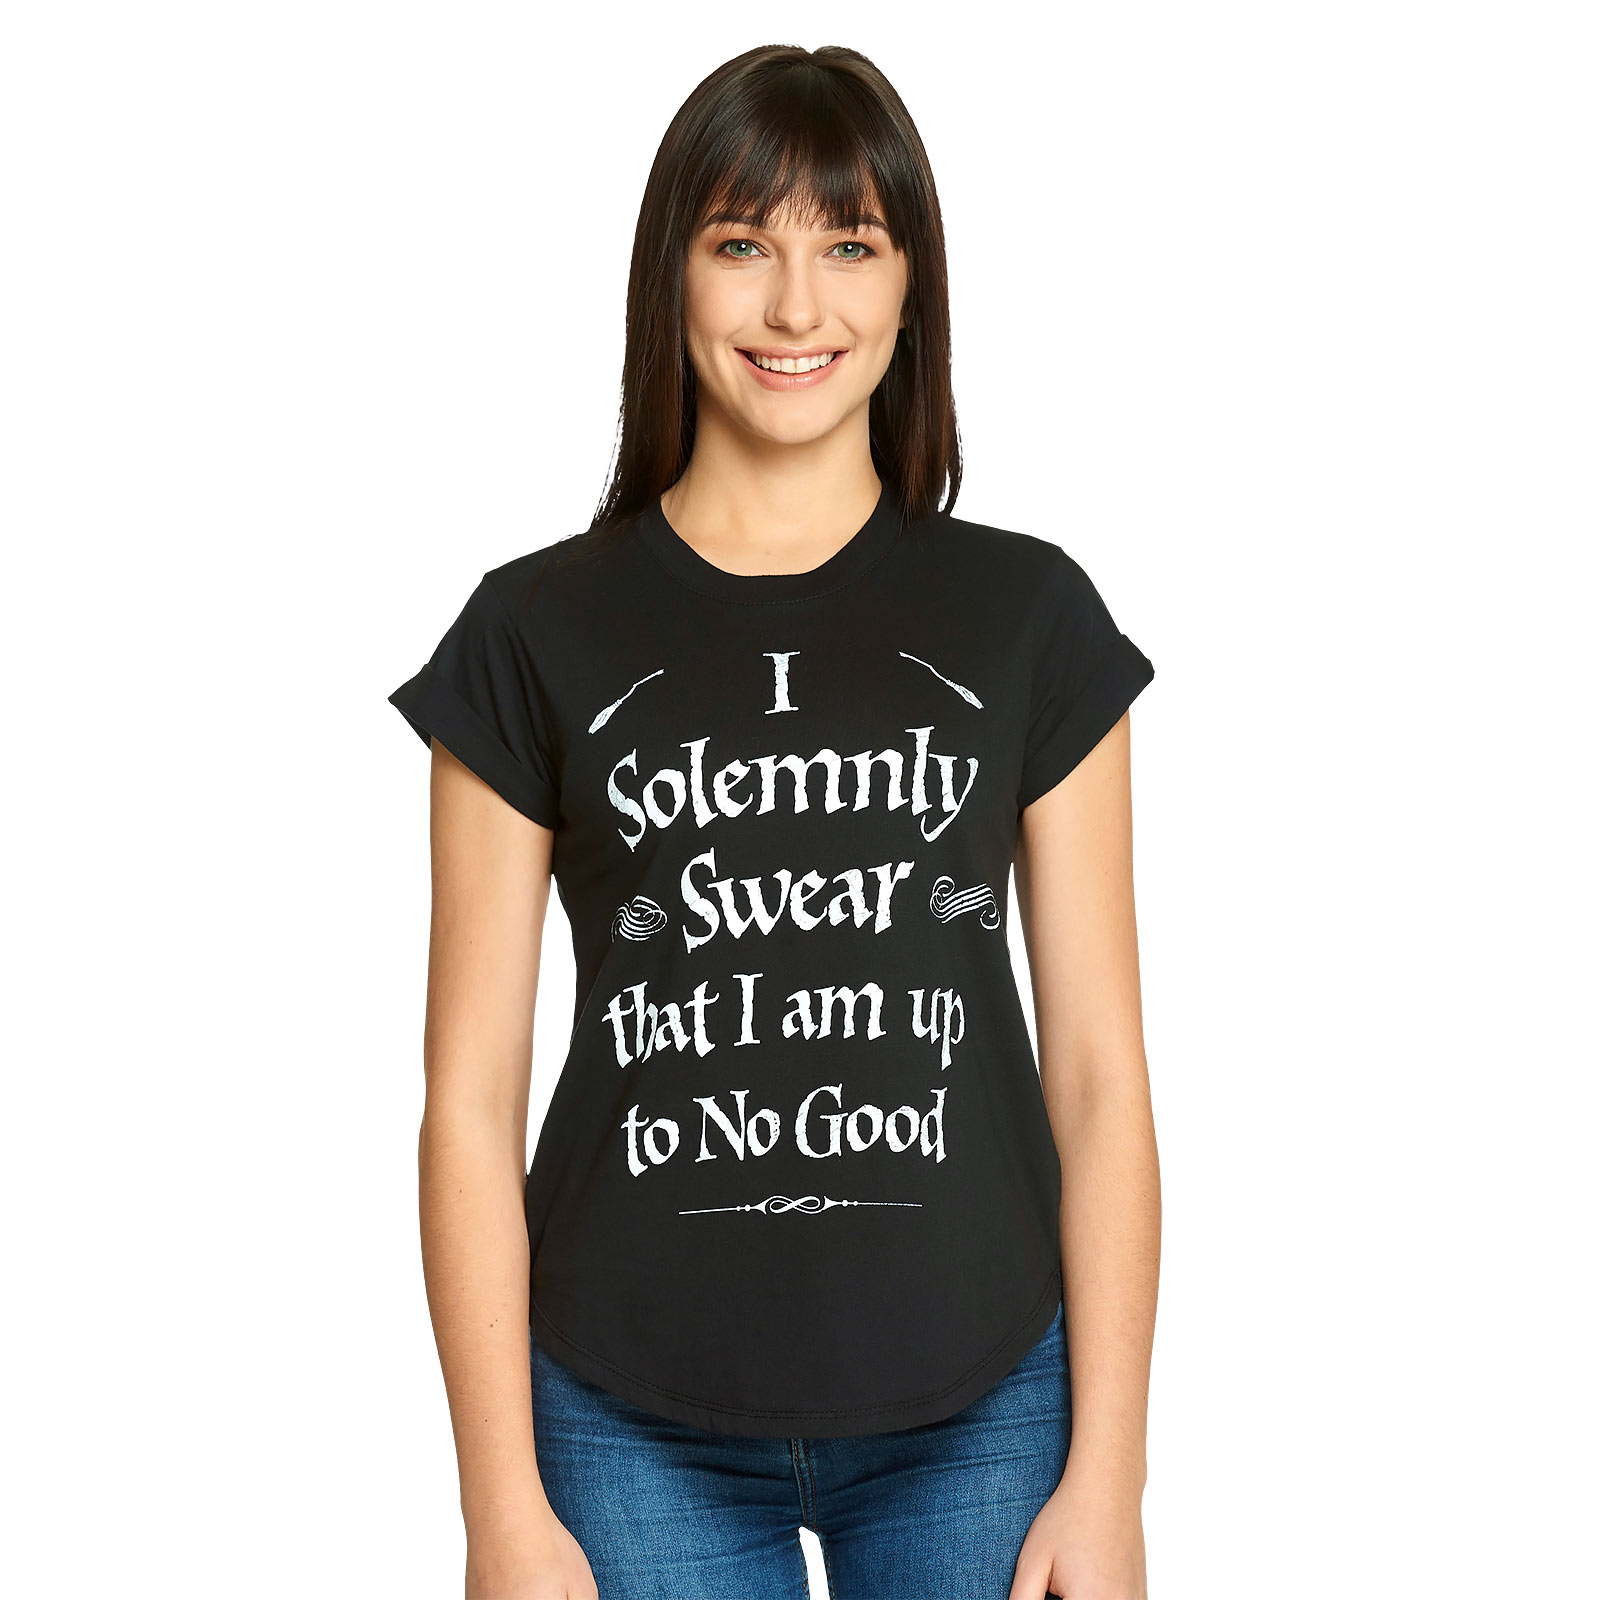 Harry Potter - Mischief Managed Women's Loose Fit T-Shirt Black